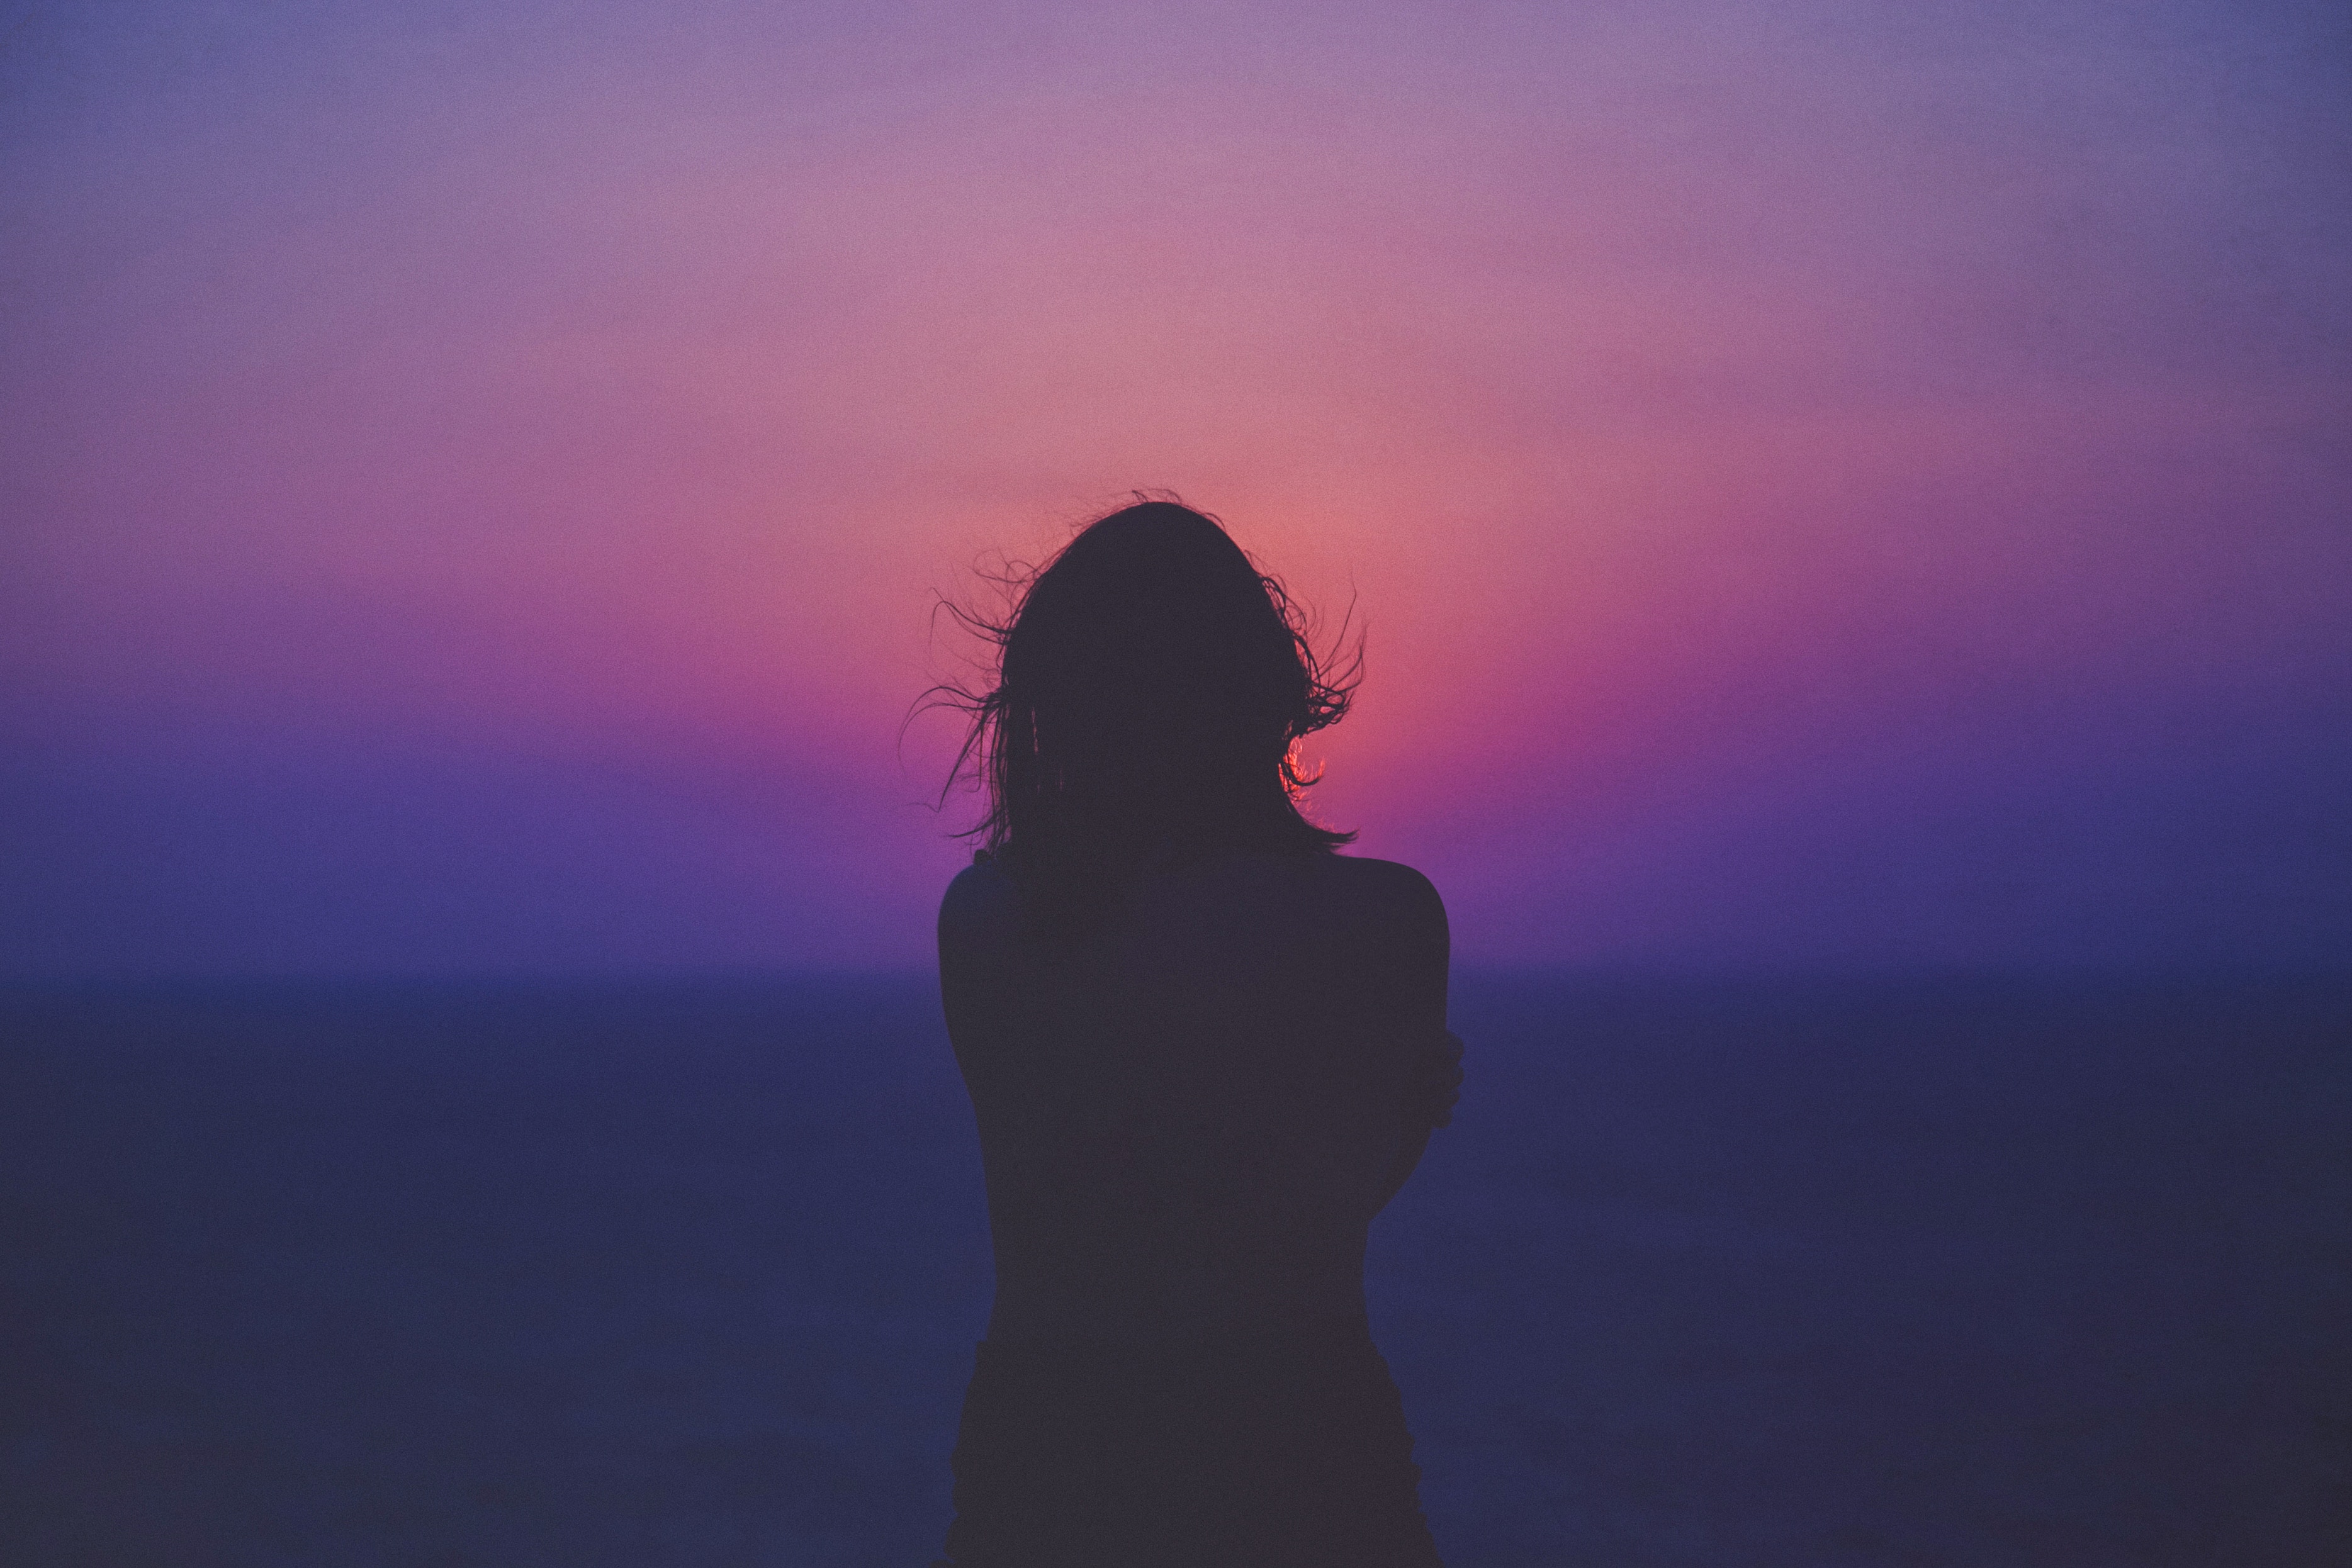 silhouette of woman's back  standing windy facing a hazy sunset mostly blueish pinkish colors, hazy